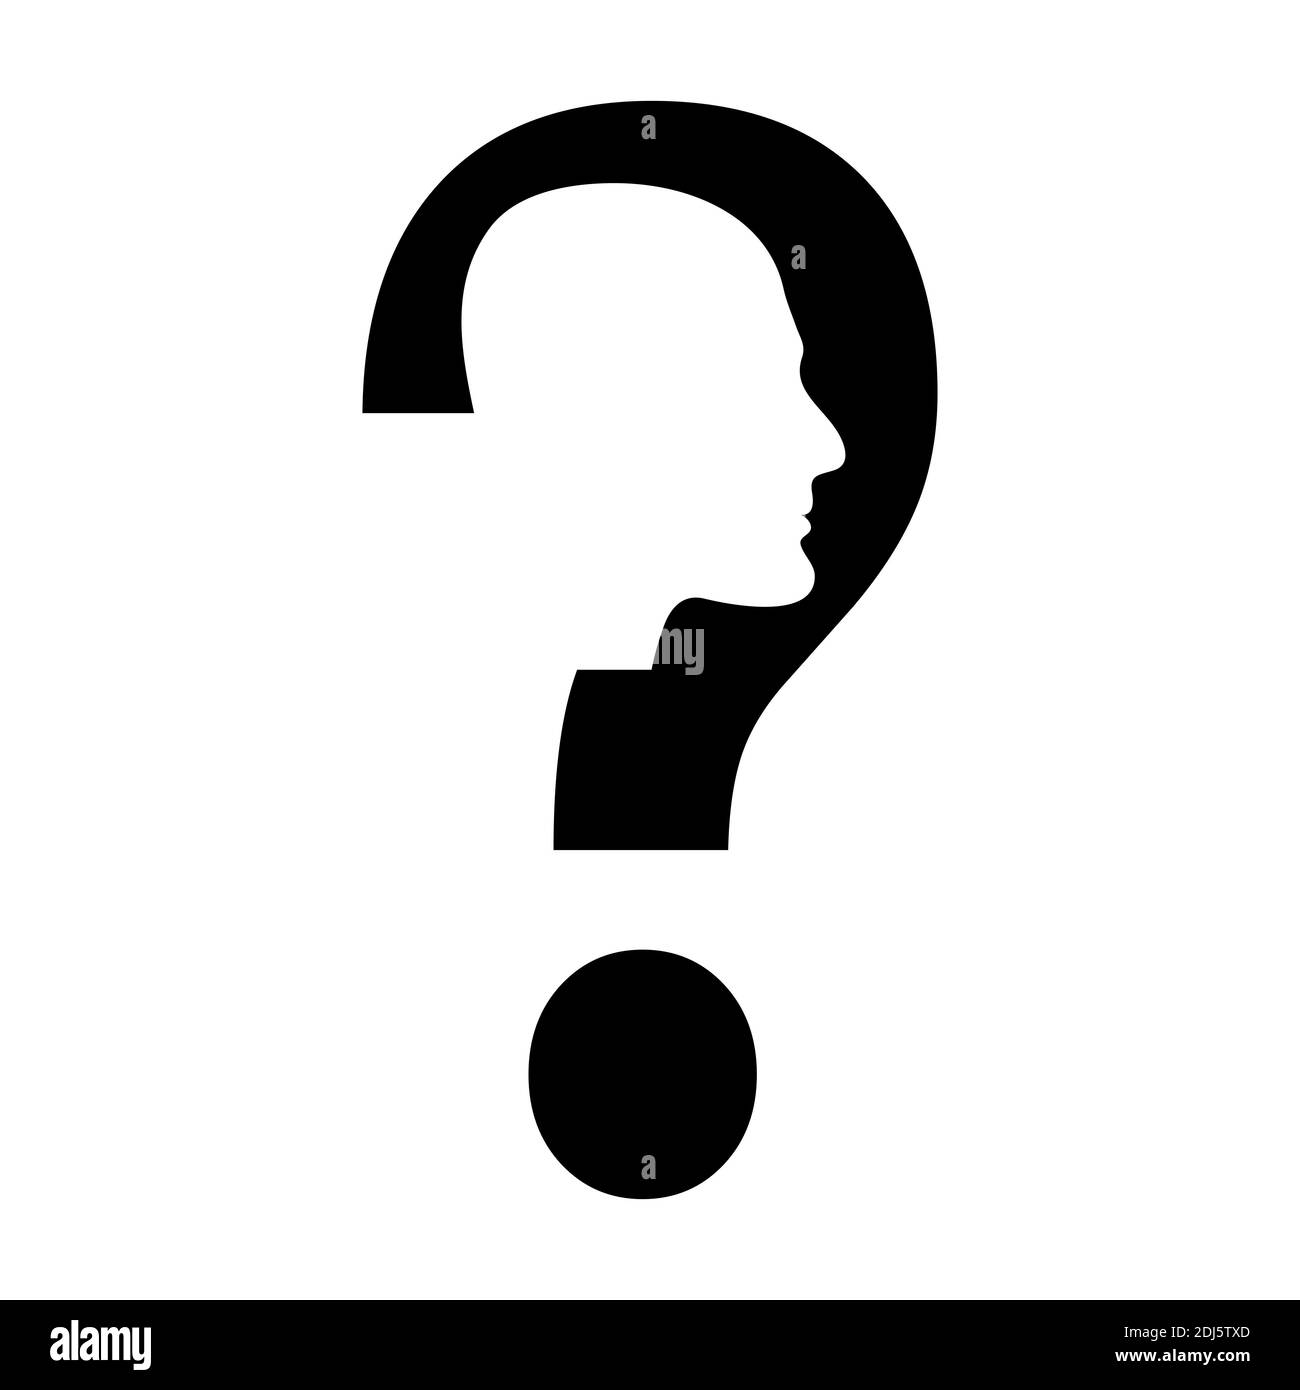 Black silhouette of head with question mark. Vector flat illustration. Stock Vector